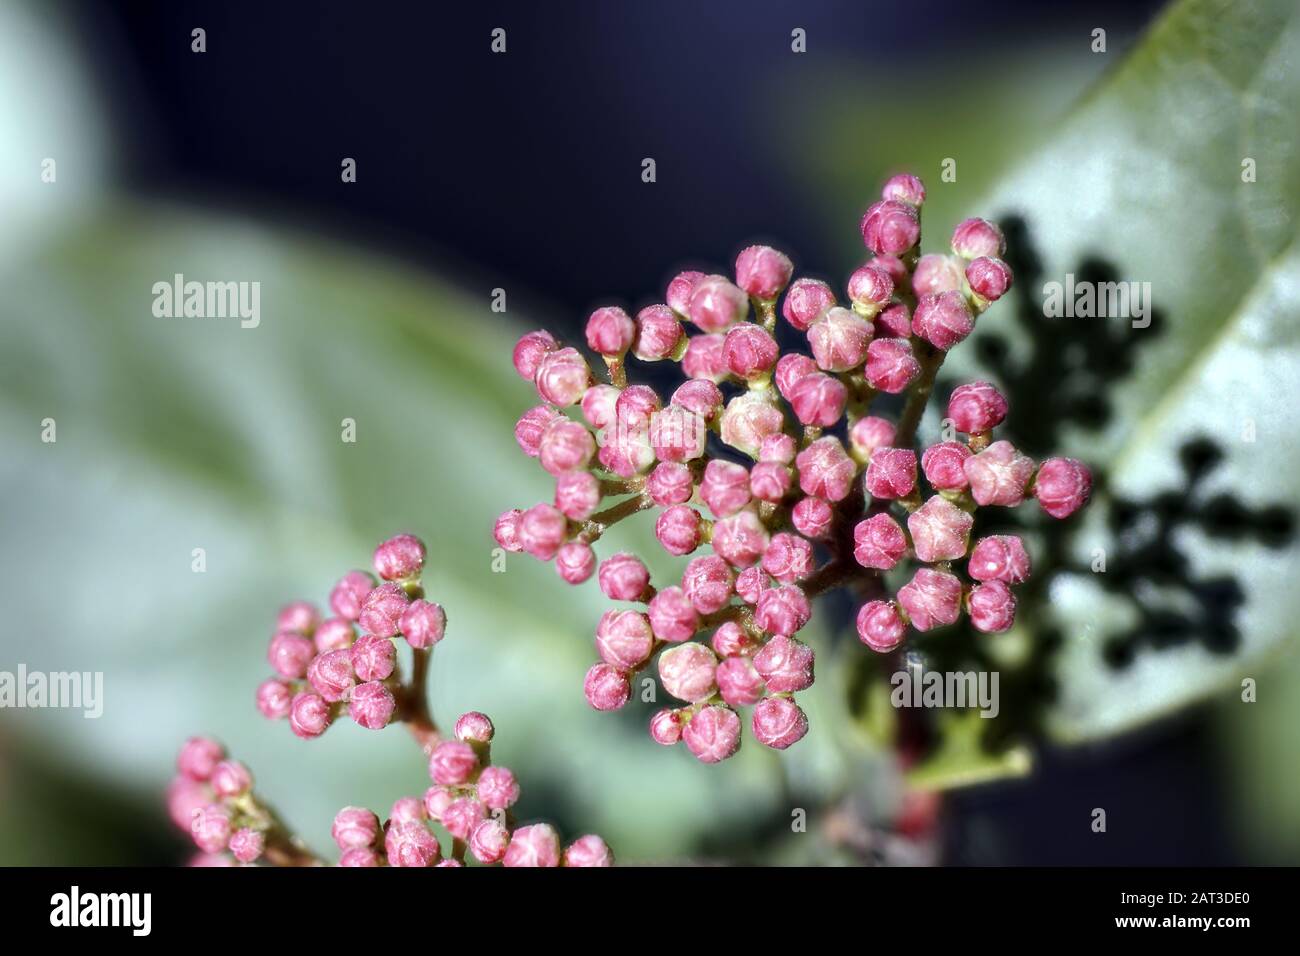 Closeup shot of beautiful pink yarrow flower buds on a blurred background Stock Photo